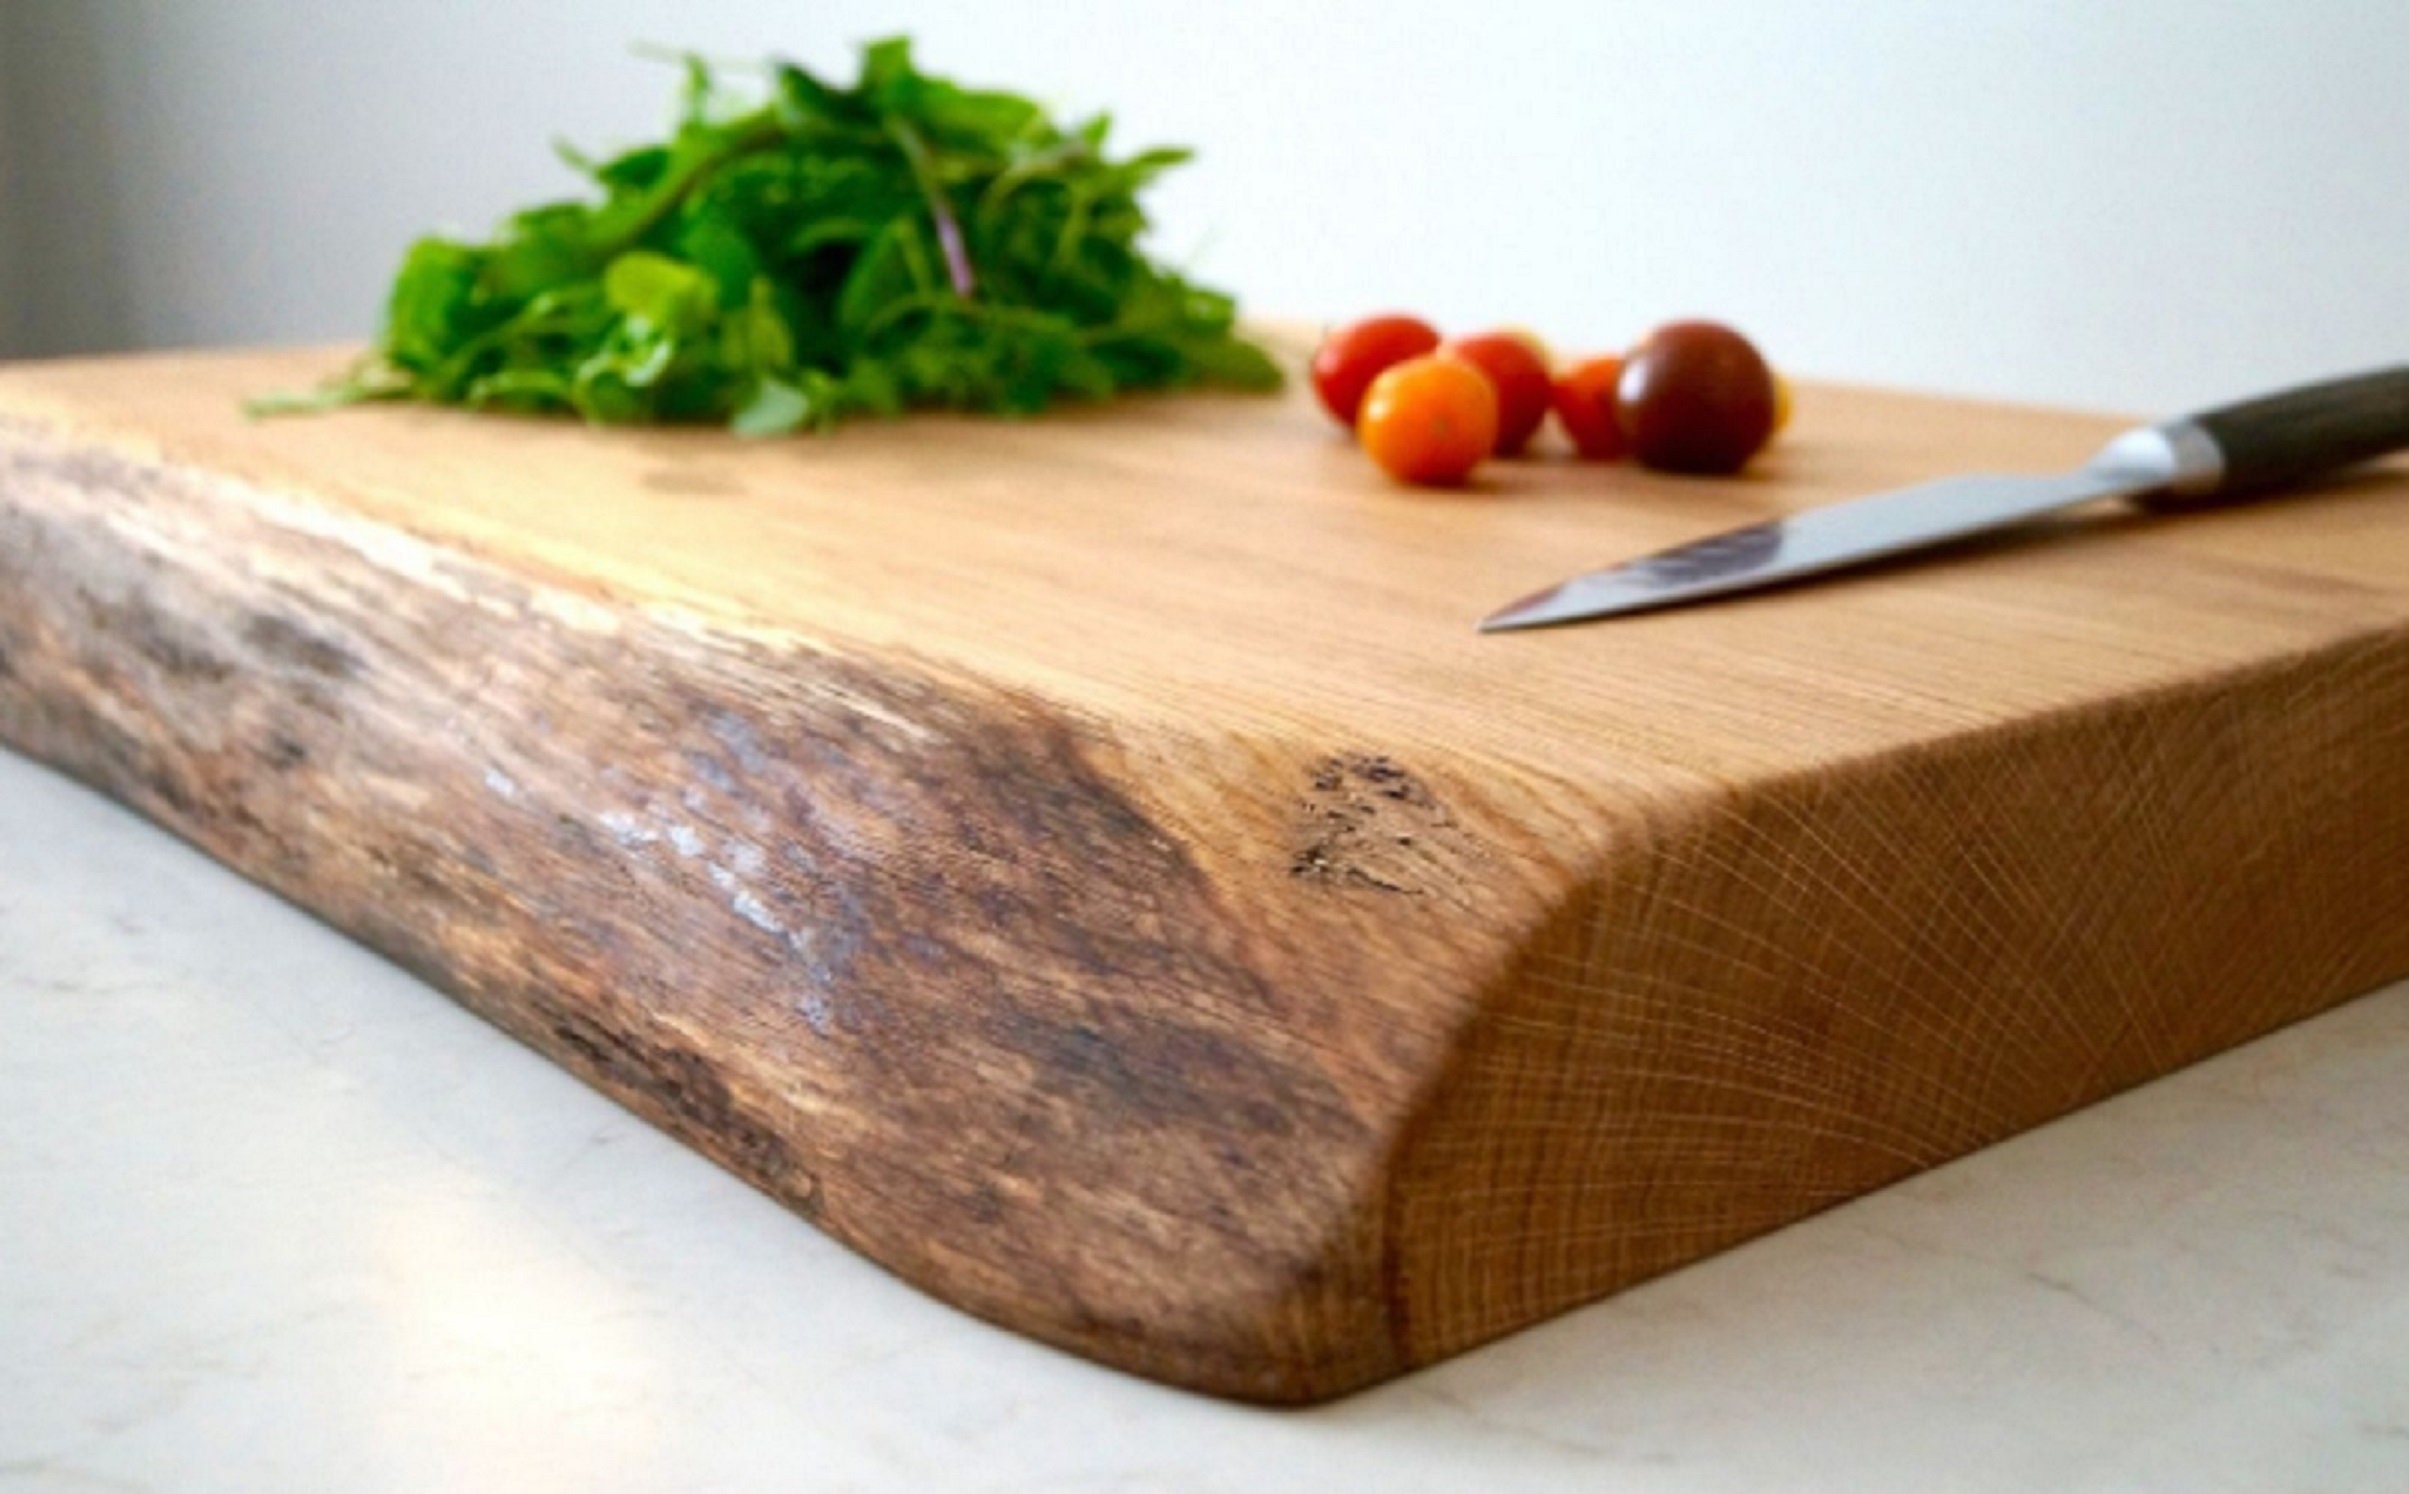 How do you treat a wooden chopping board